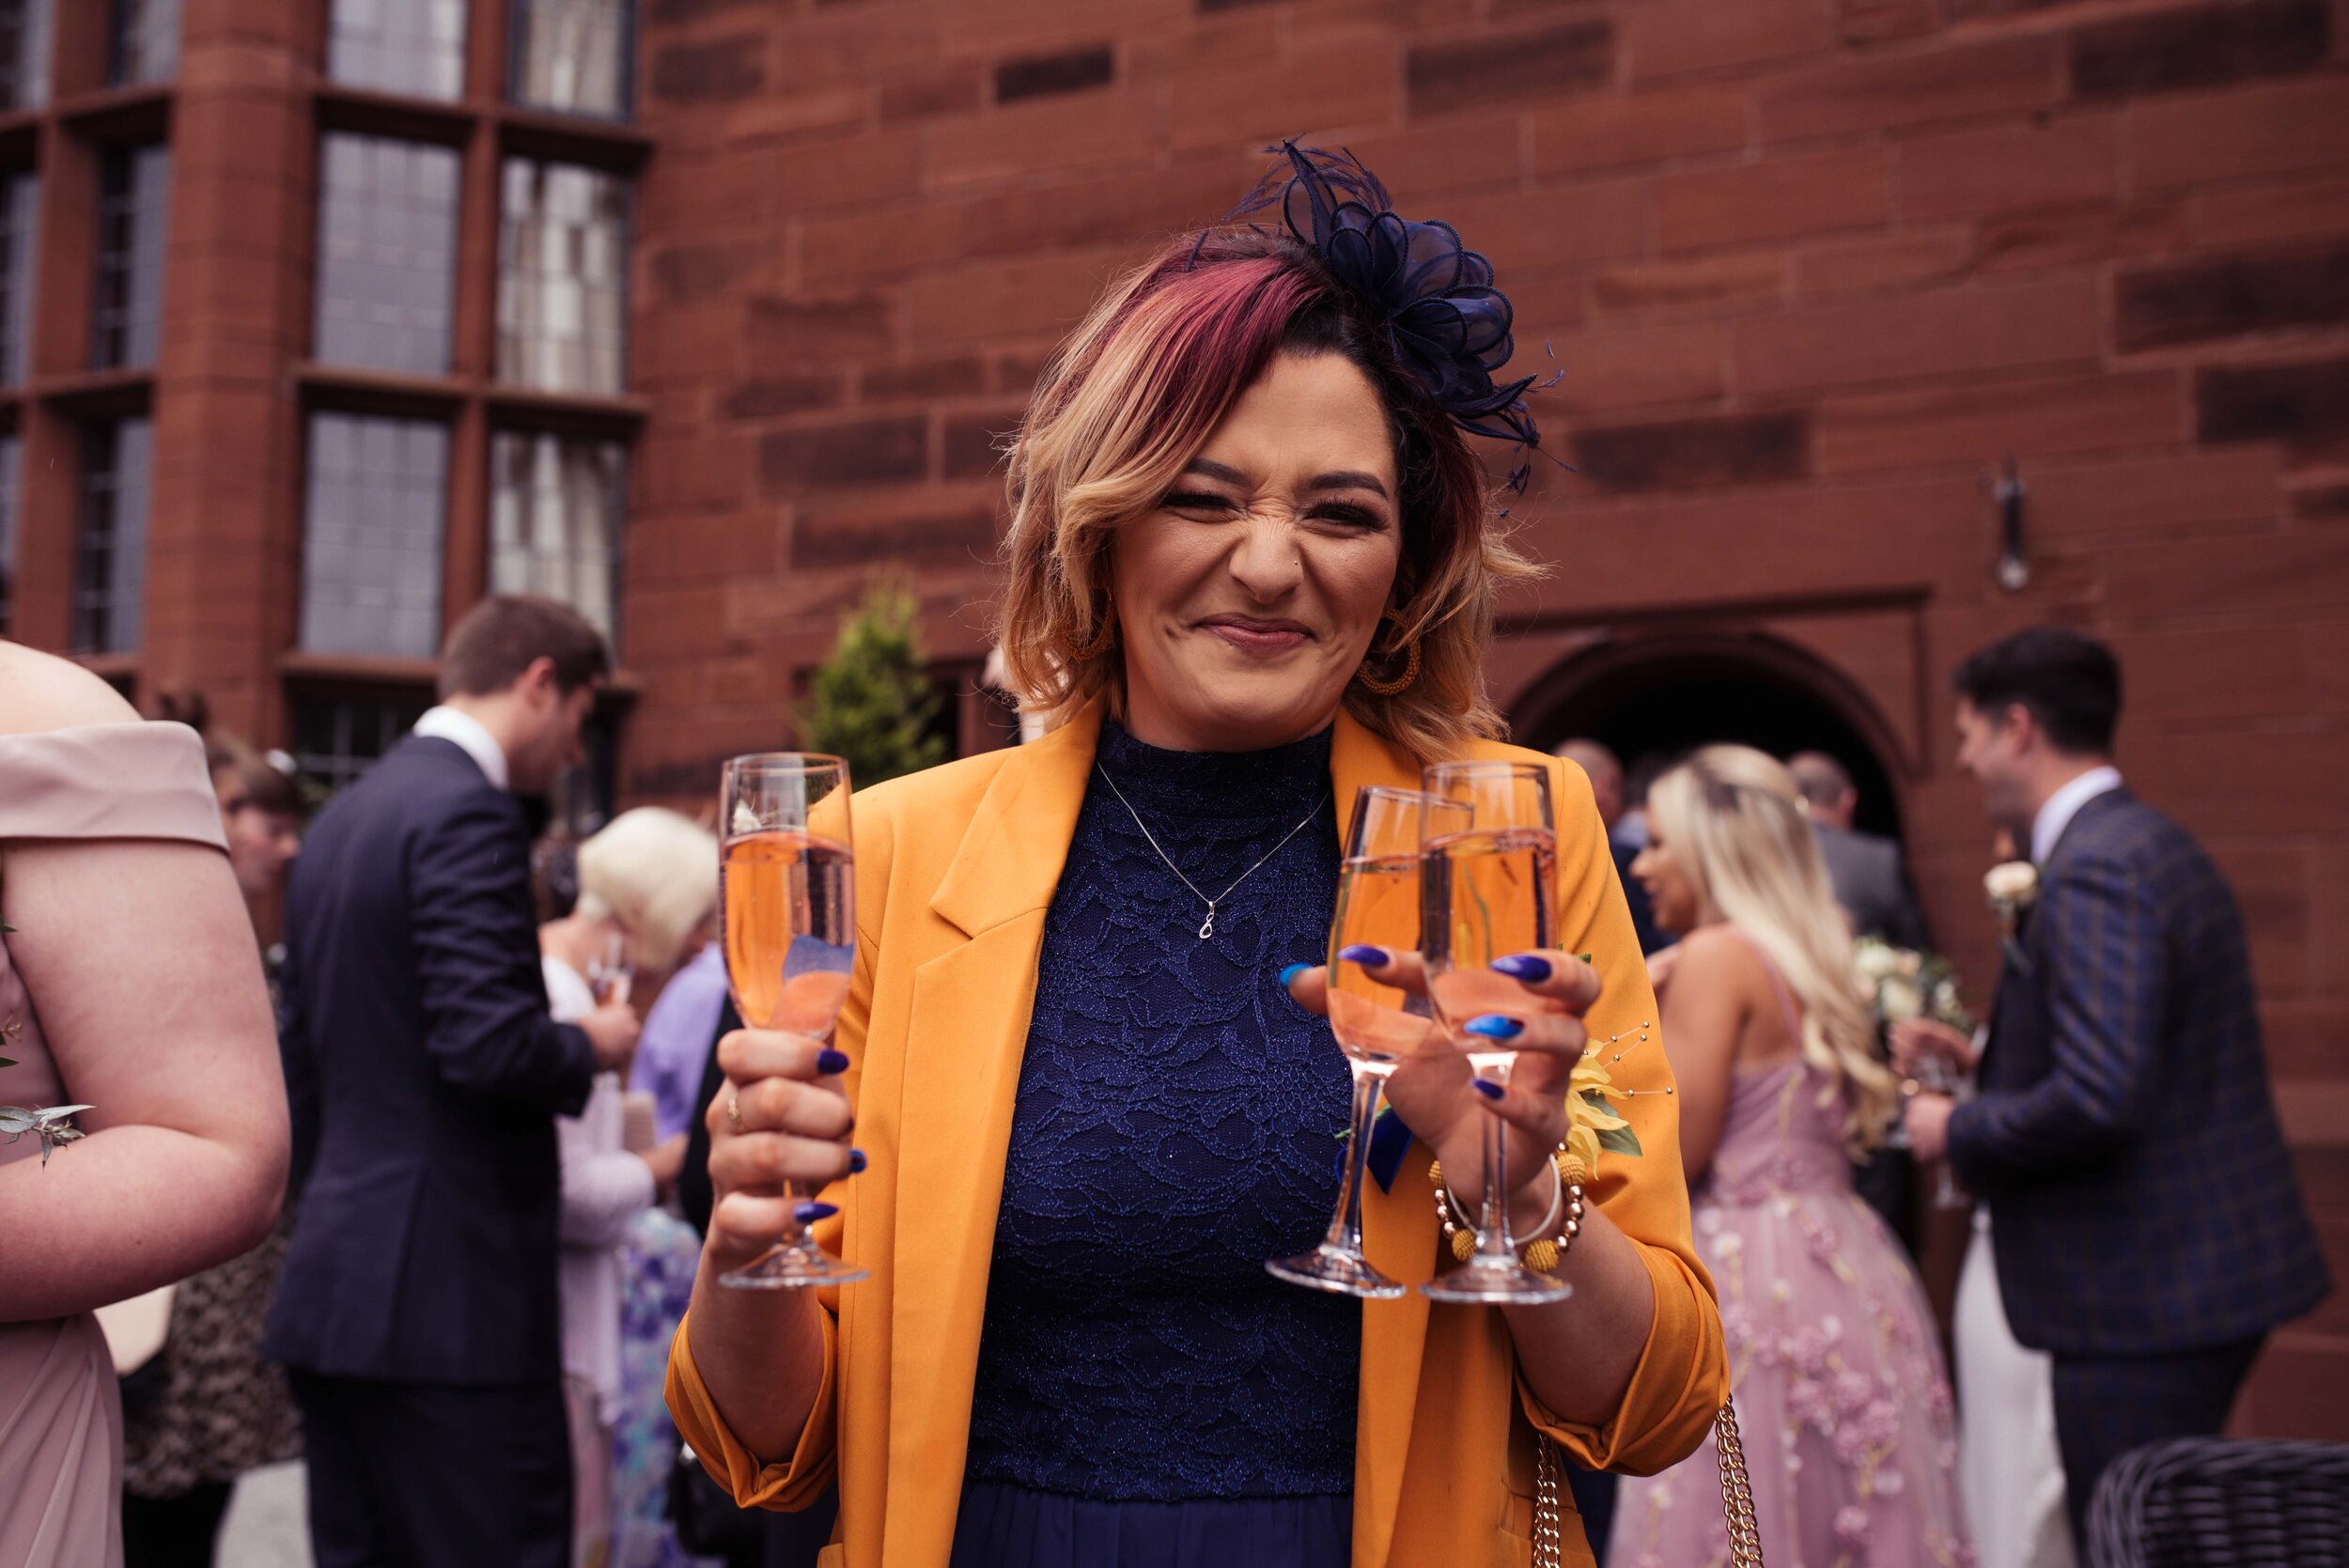 Wedding guest in a yellow jacket carrying two glasses of prosecco